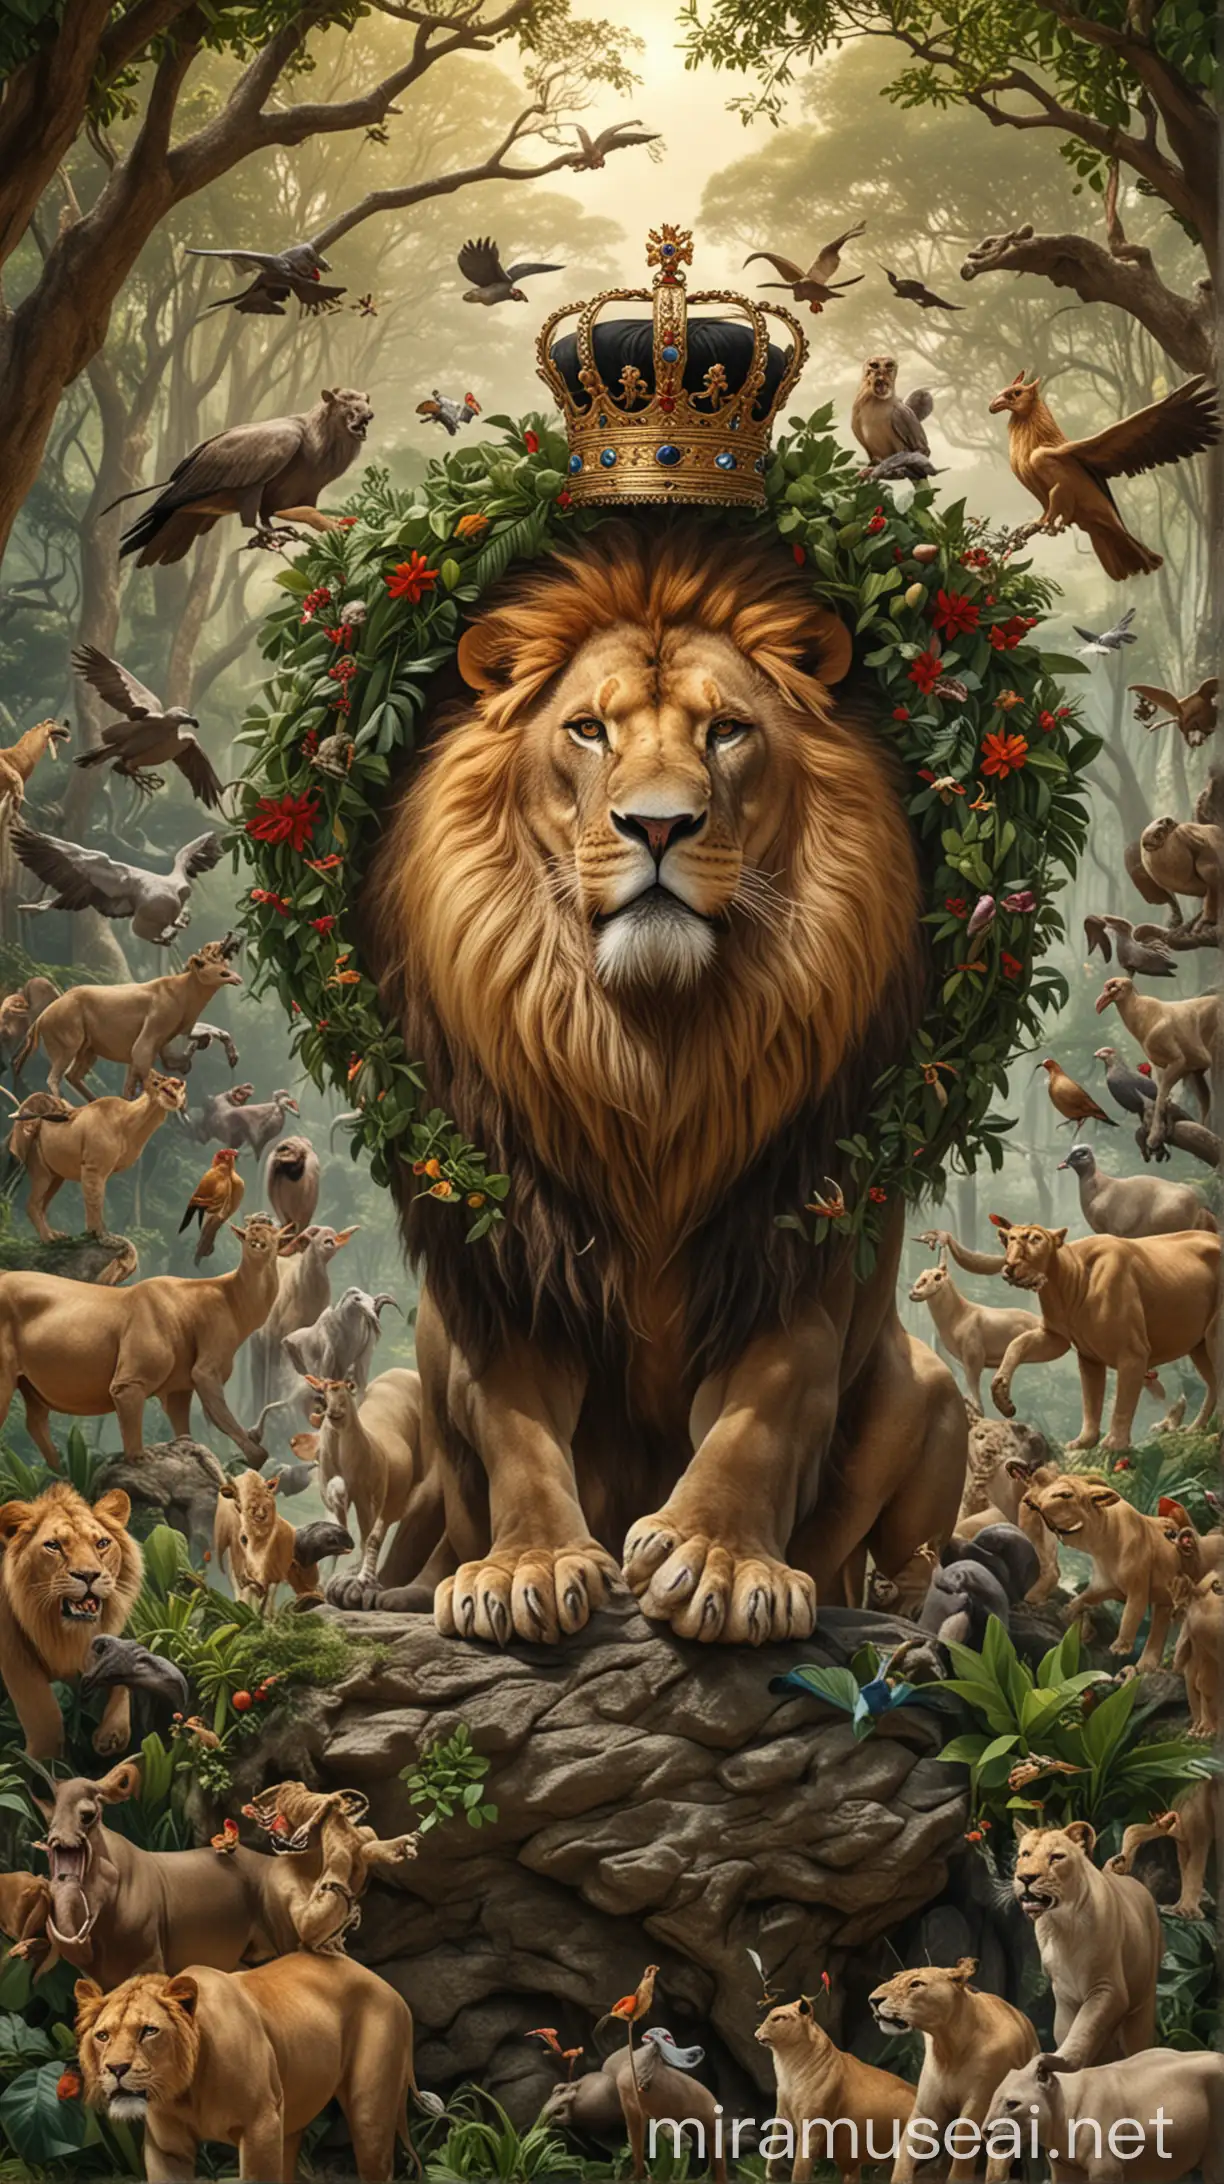 The main lion wearing a crown is roaring and all the animals including elephants, tigers, deer, horses, goats, hippos bow down to respect the main lion, with a tropical forest in the background during the day and there are birds perched on tree branches